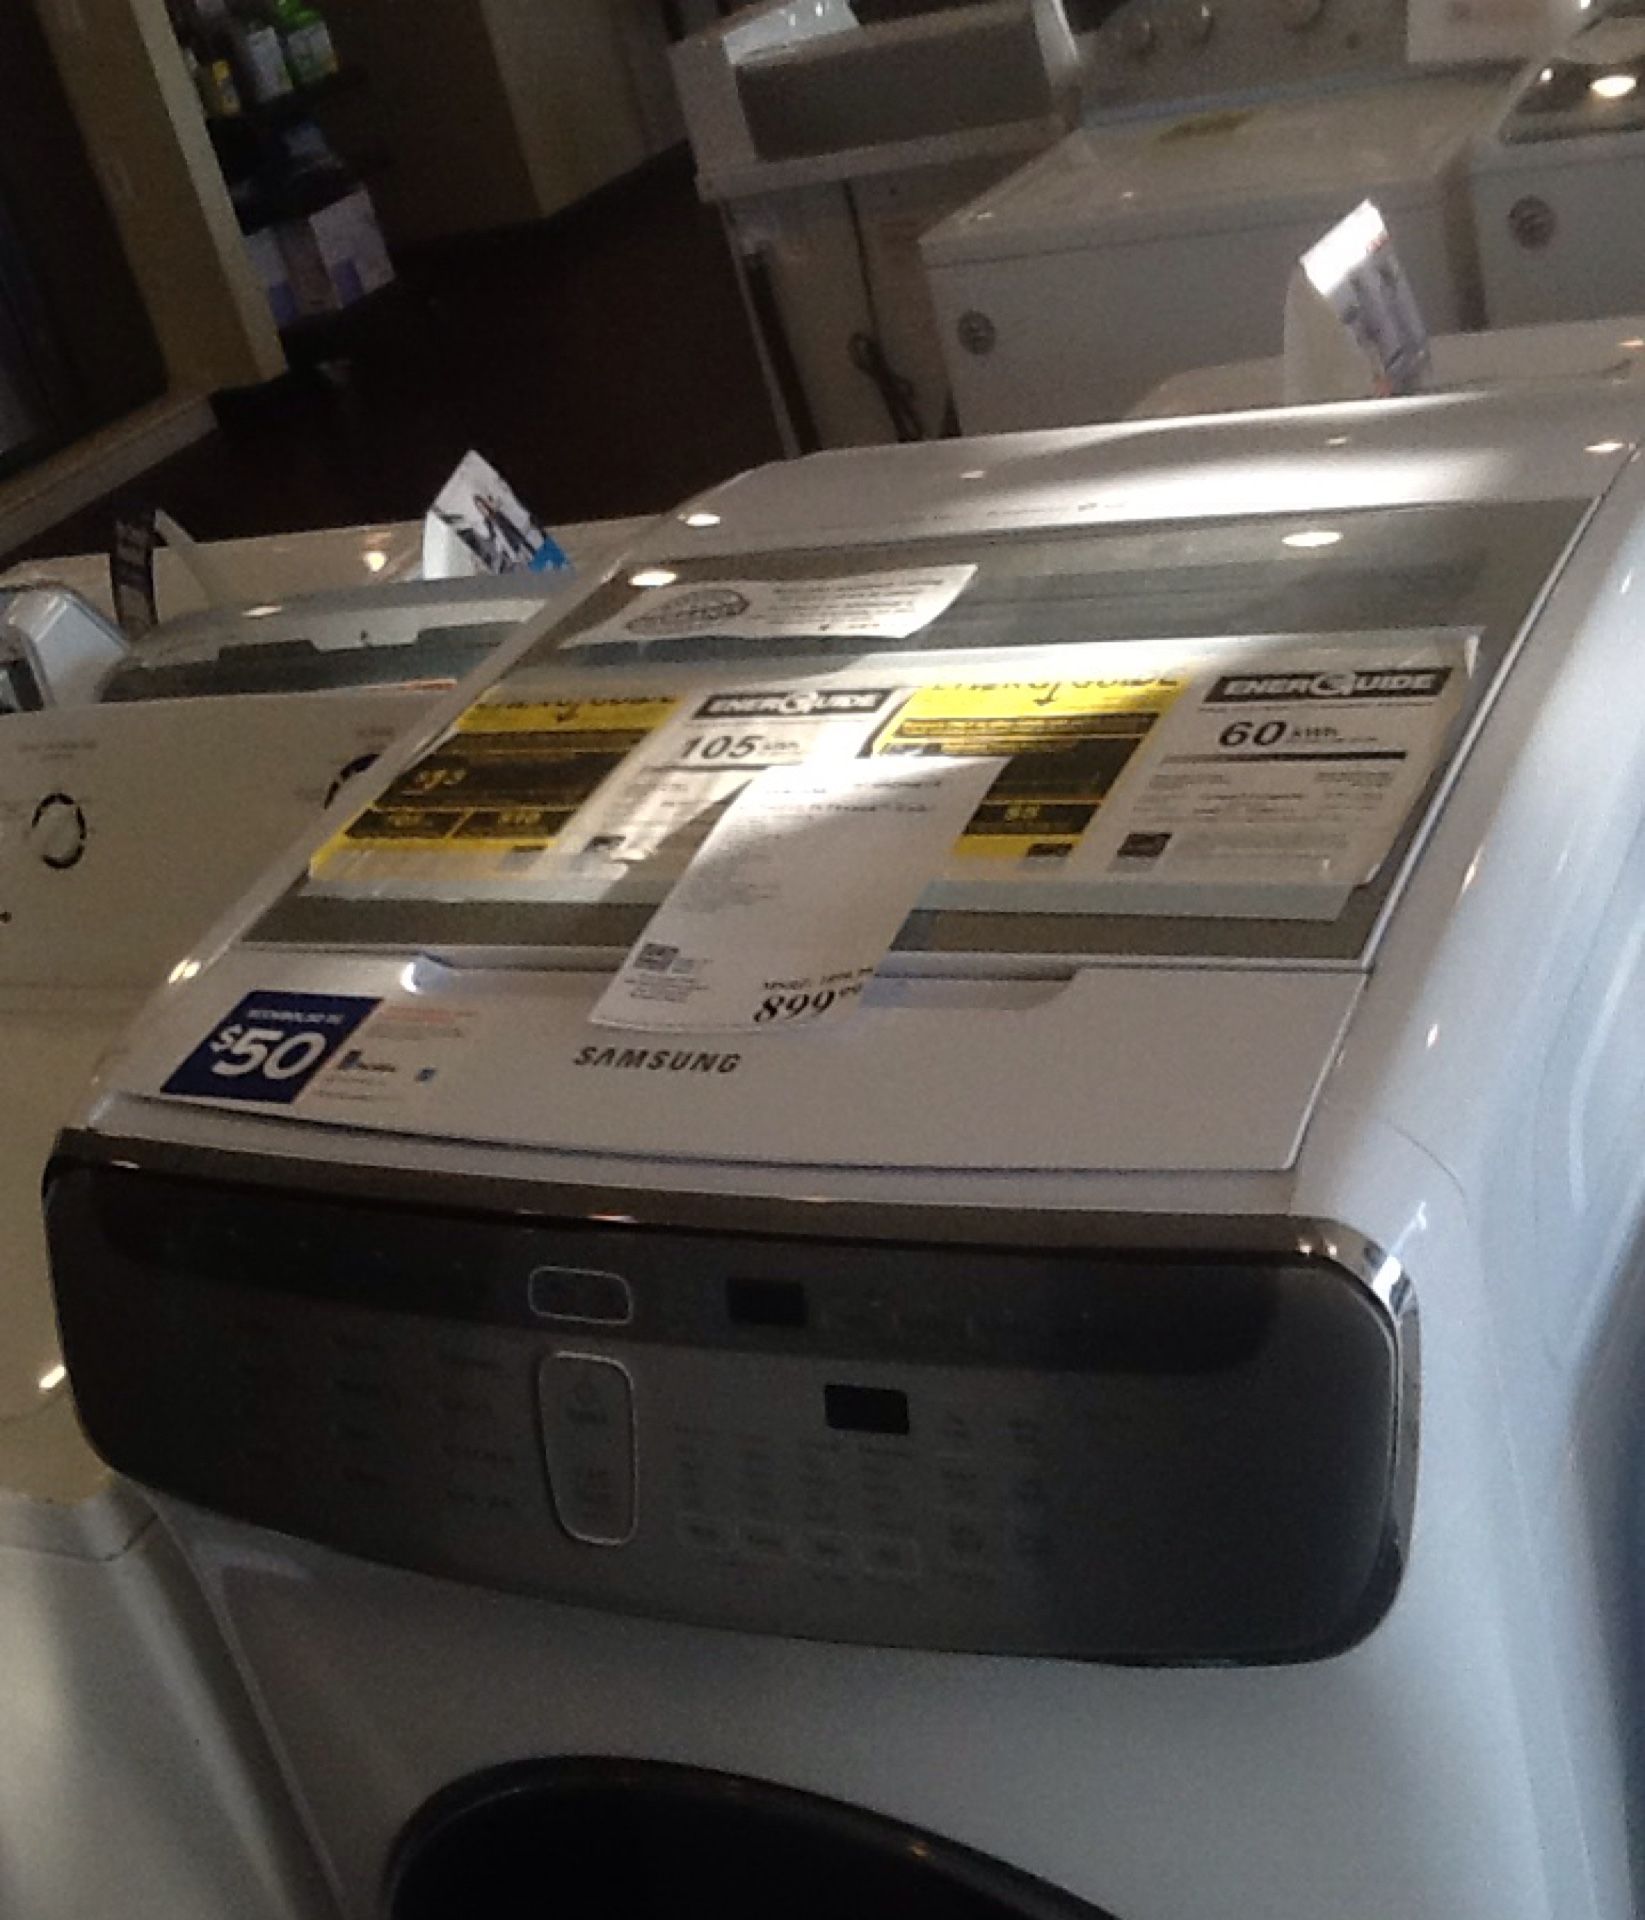 New open box Samsung washer WV60M9900AW